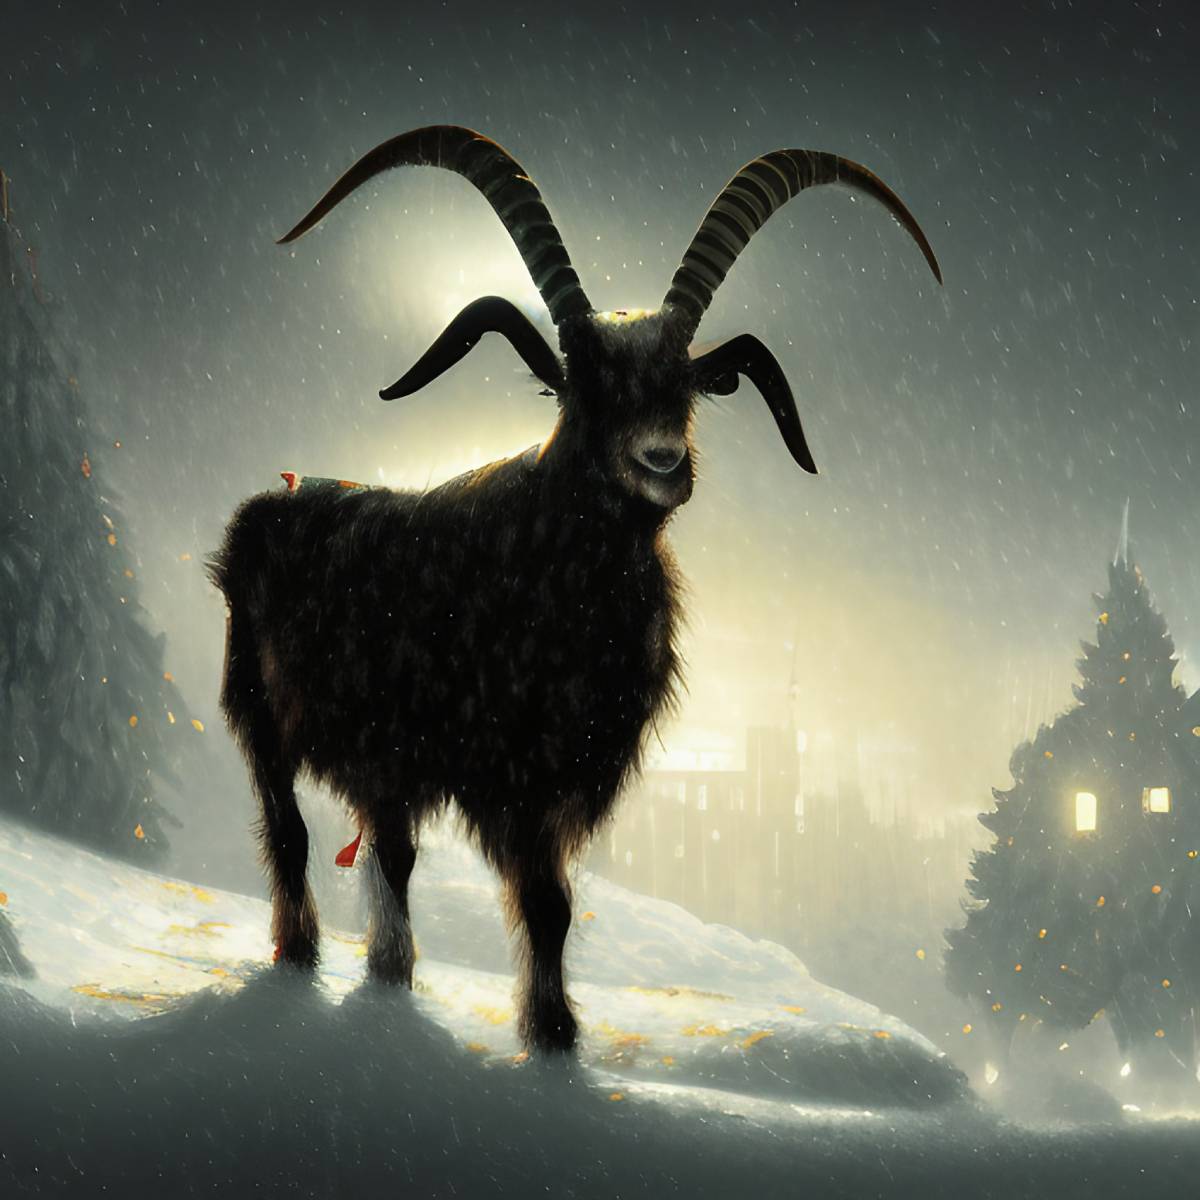 The Yule goat was once a Scandinavian version of Santa and, for centuries before that, he was a dying-and-rising deity bringing good luck and fertility to those who celebrated it. (© Odd Feed)